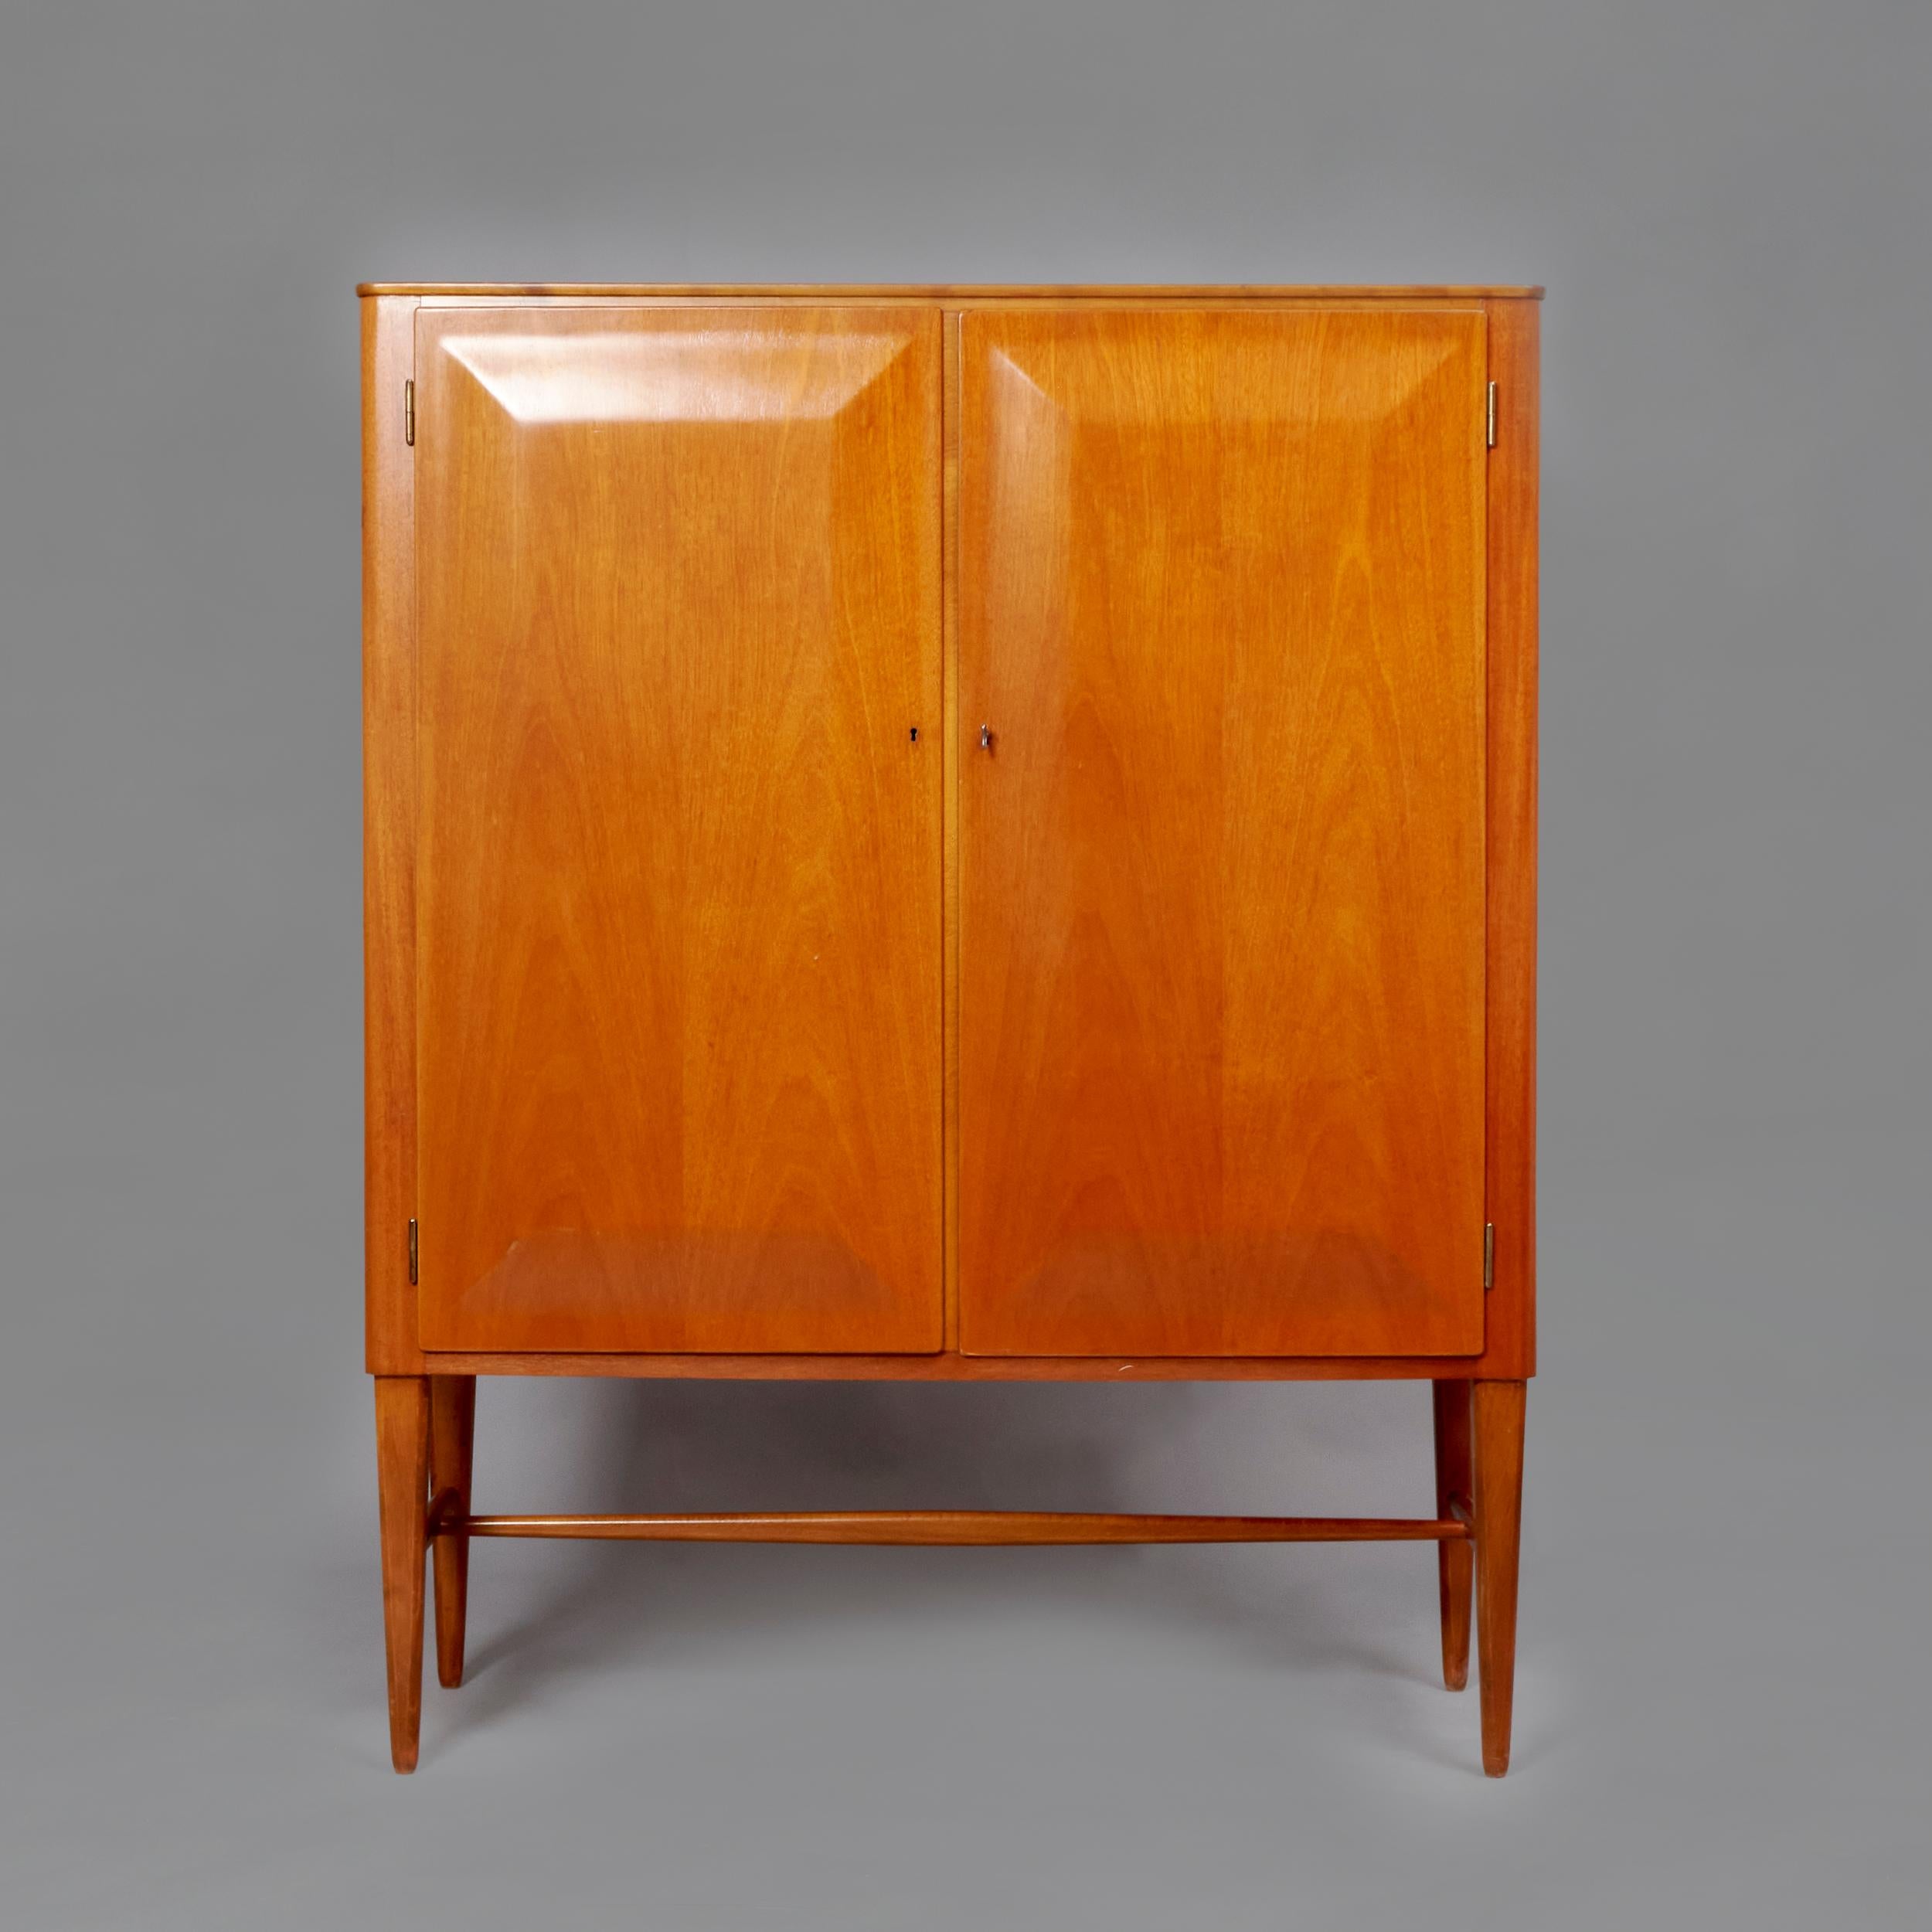 Cabinet in modelled Mahogany wood designed by Axel Larsson for Bodafors. Sweden, 60s. Excellent restored condition that might present slight traces of use.
Axel Larsson was a Swedish interior and furniture designer who worked for Svenska